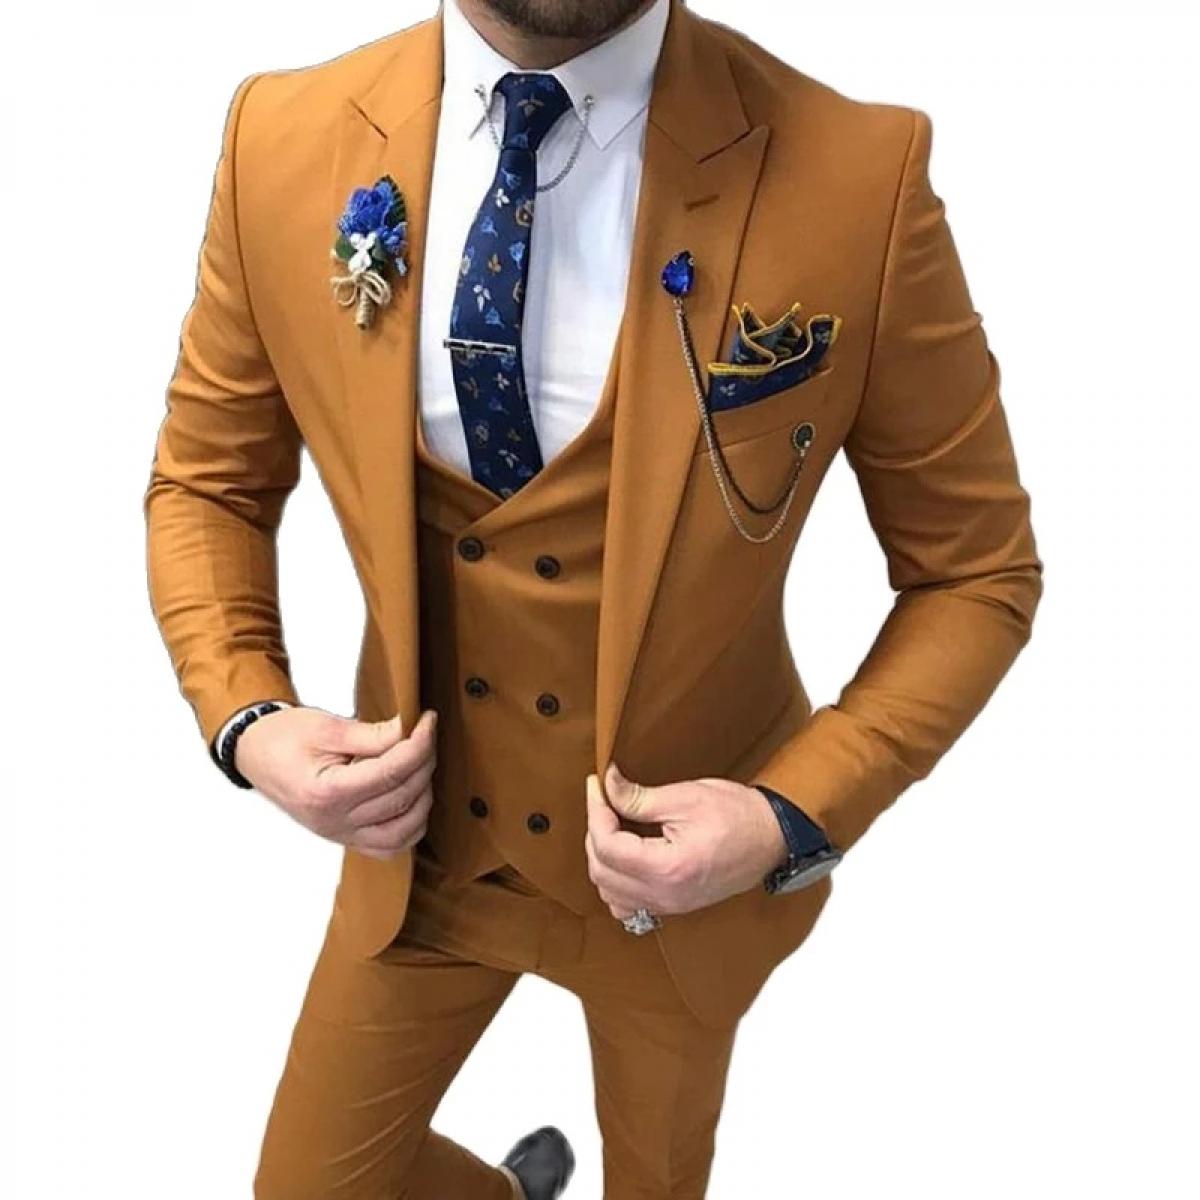 3 Piece Slim Fit Men Suits Casual Style Brown Male Fashion Wedding Tuxedo For Groomsmen Dinner Jacket With Vest Pants El